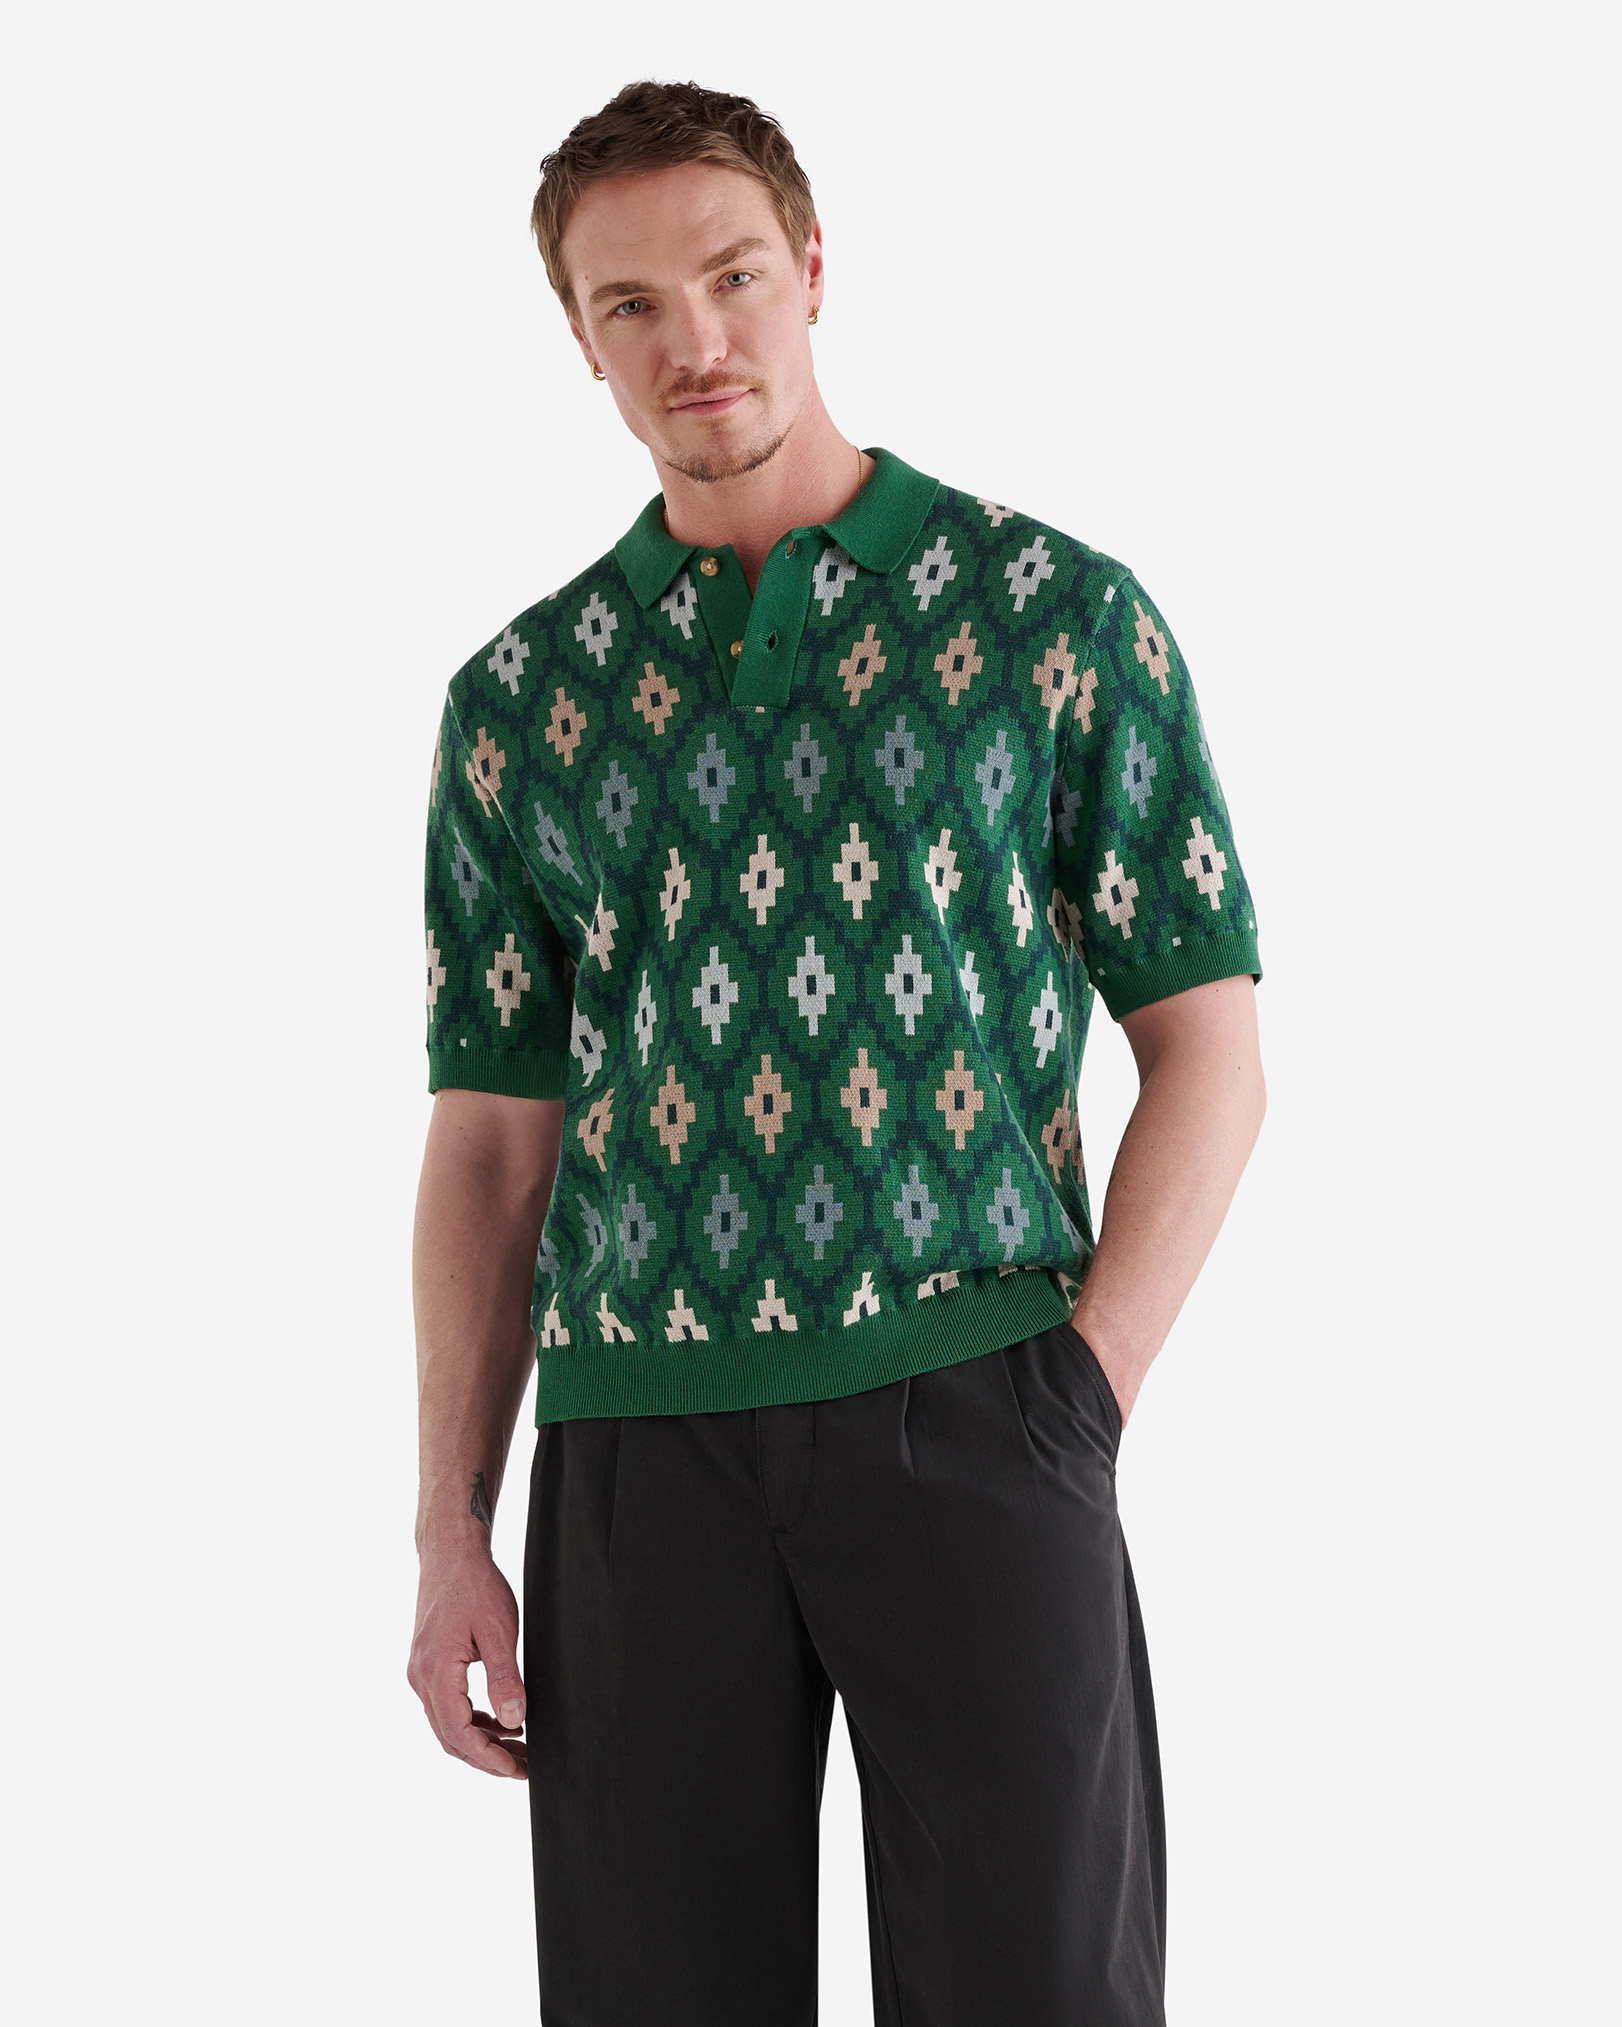 Roots Severn Sweater Polo Shirt in Varsity Green